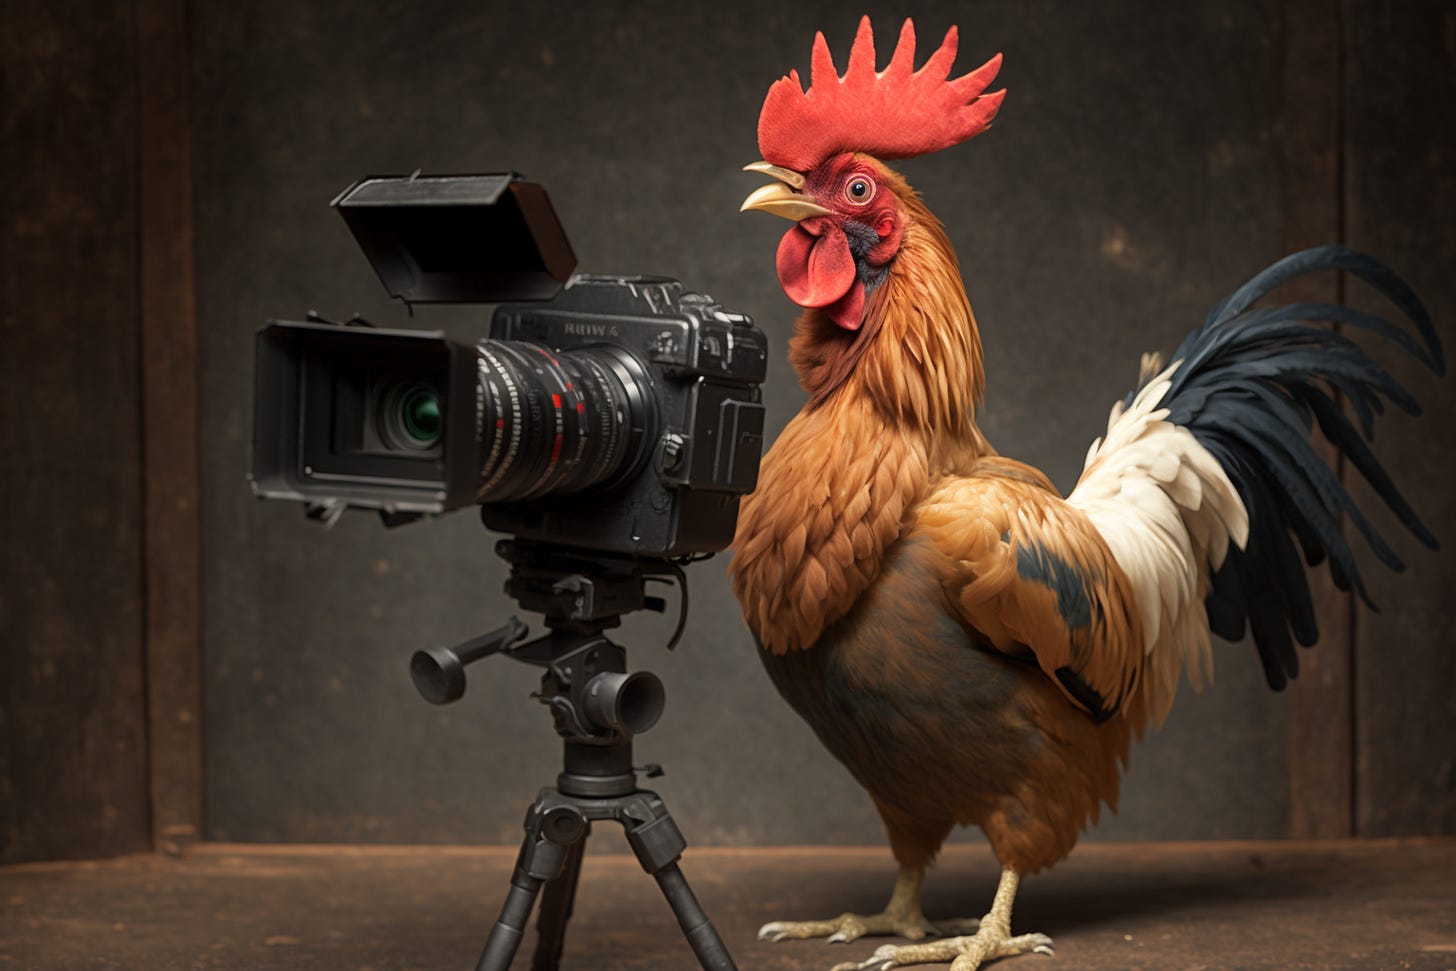 Rooster holding a video camera